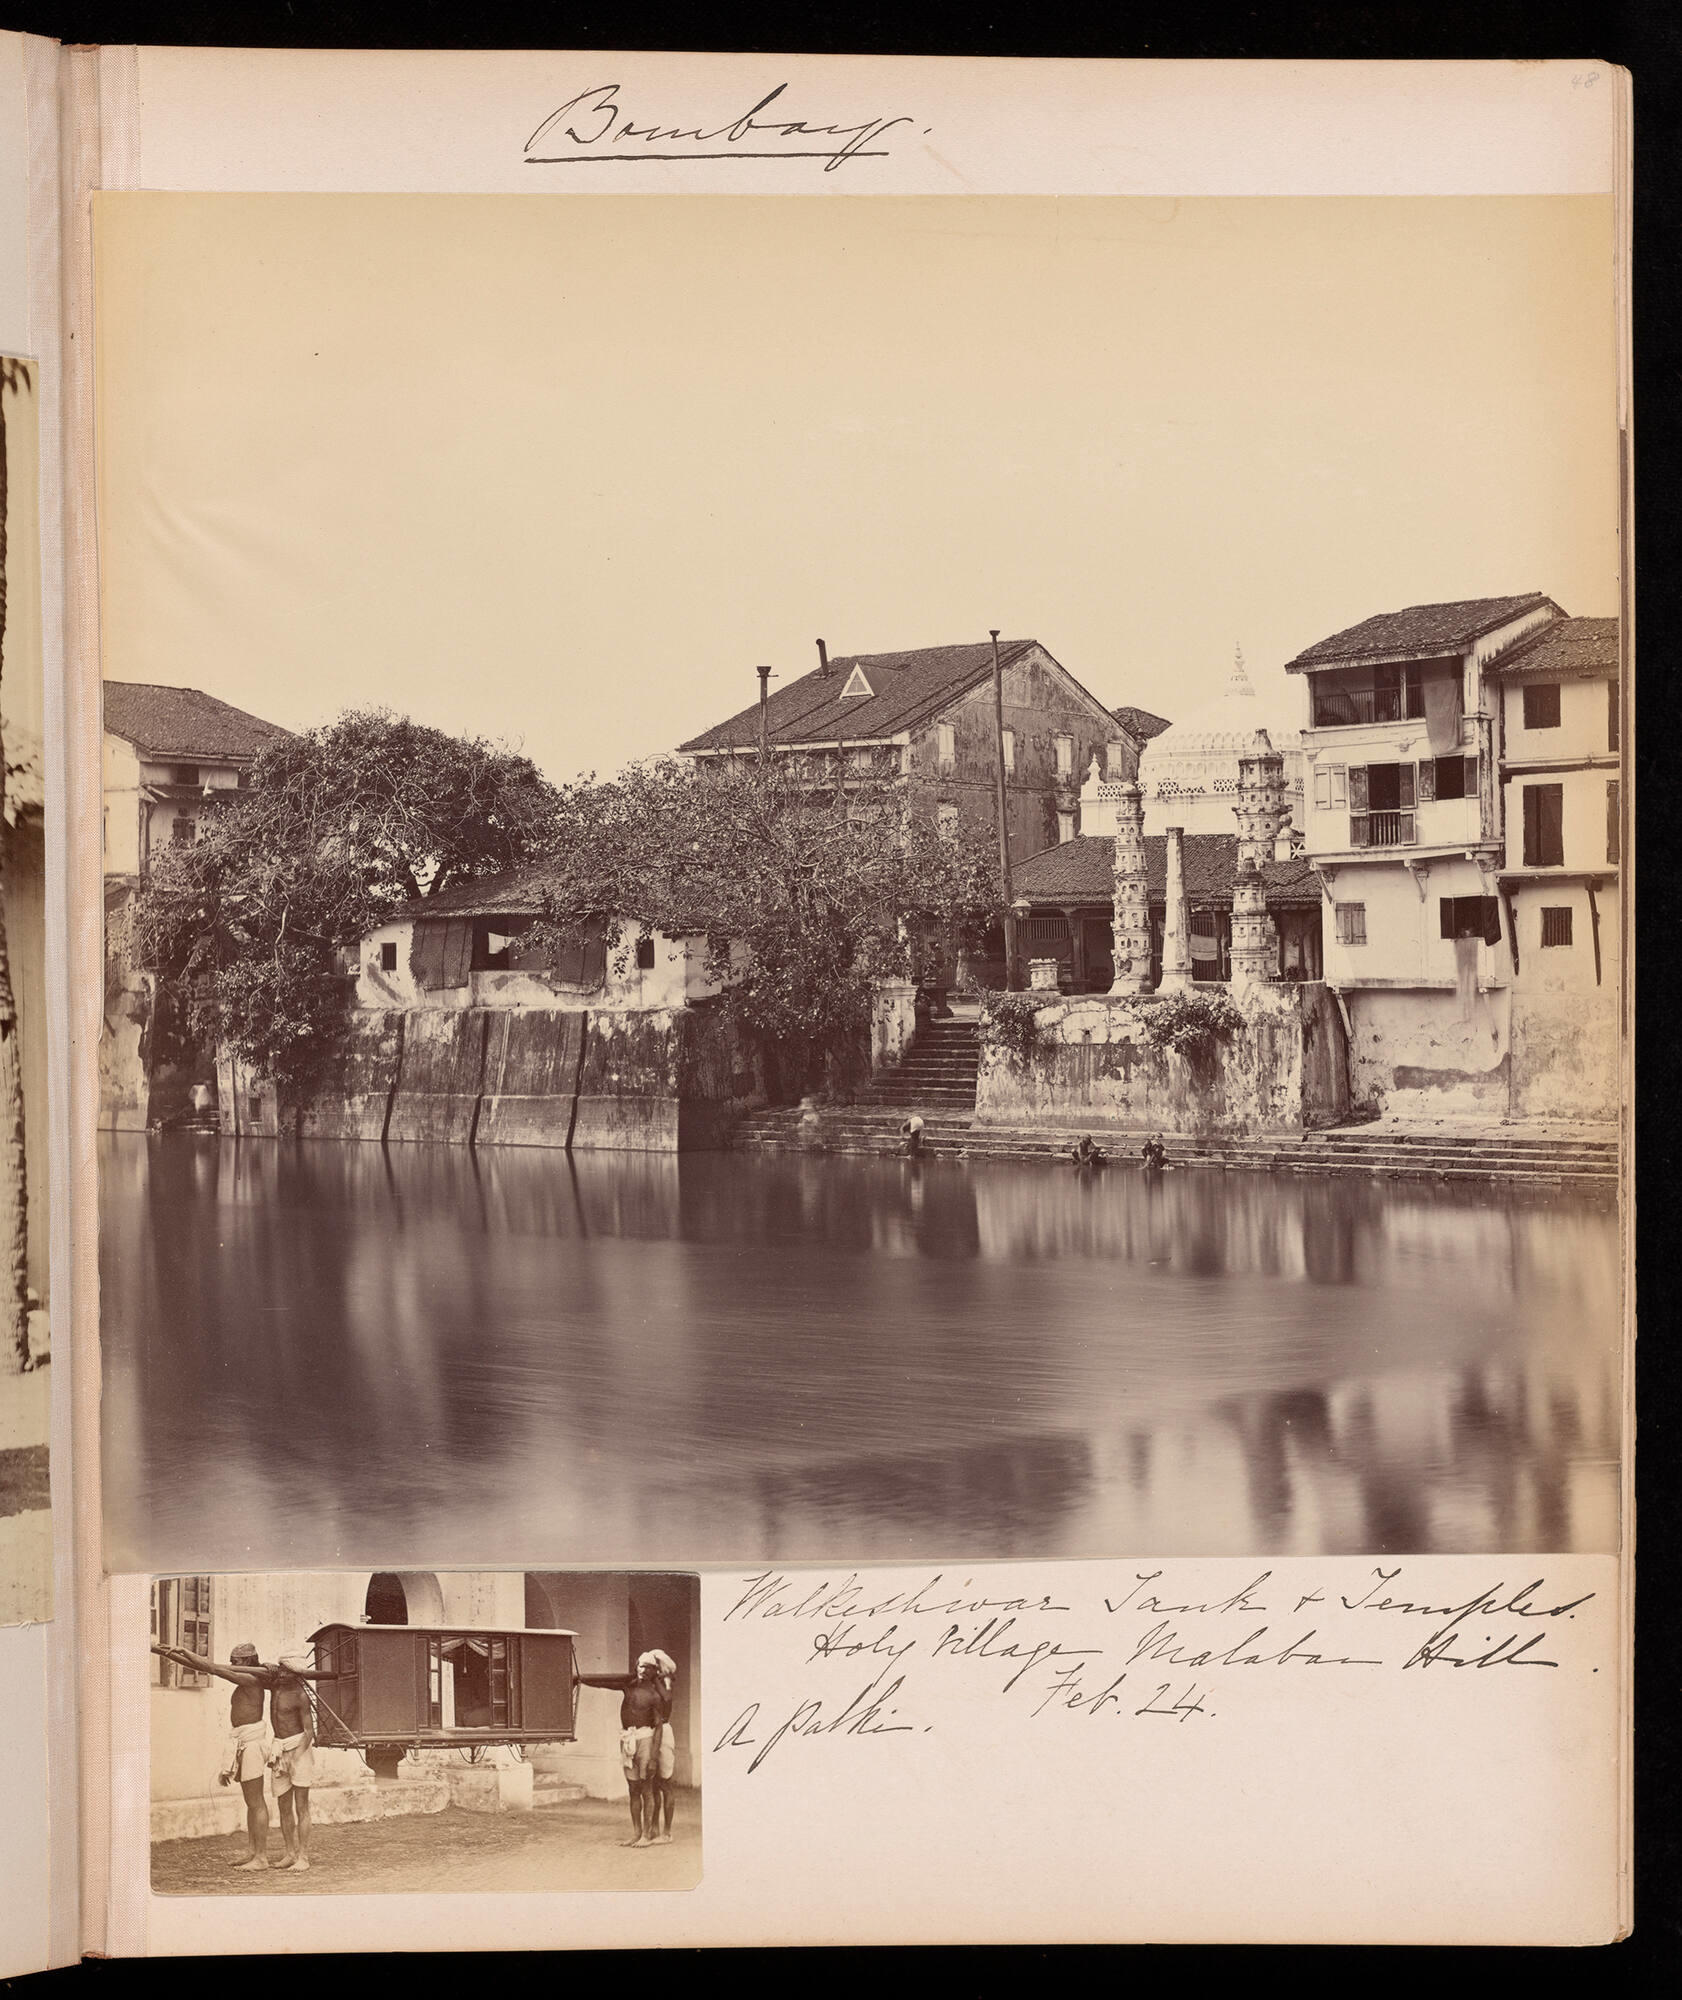 Two black and white photographs of four Indian men carrying a palanquin and buildings including a temple next to a reservoir in the city of Bombay